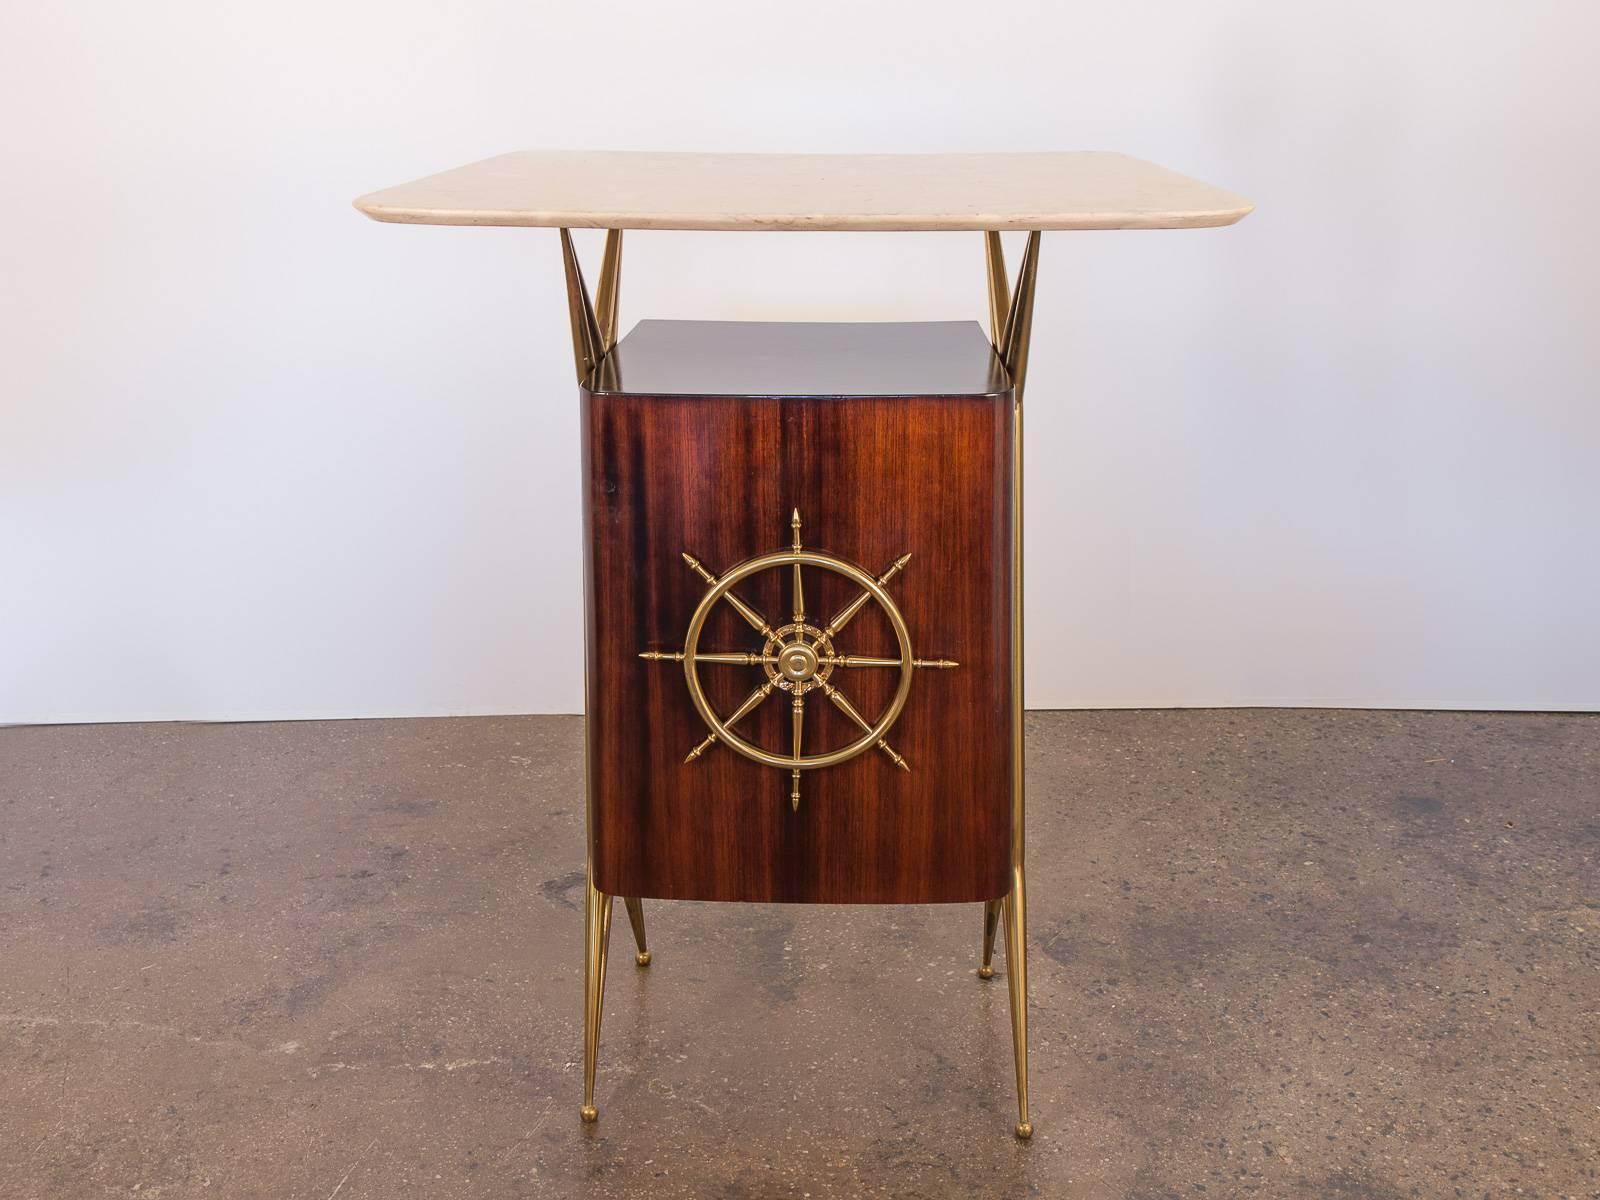 Effeminate, glamorous dry bar in the manner of Italian designer and architect Gio Ponti. Hefty, solid rounded marble counter-top sits on sculpted, jaunty brass legs. The rounded rosewood veneer cabinet adorns a charming nautical wheel on the front,